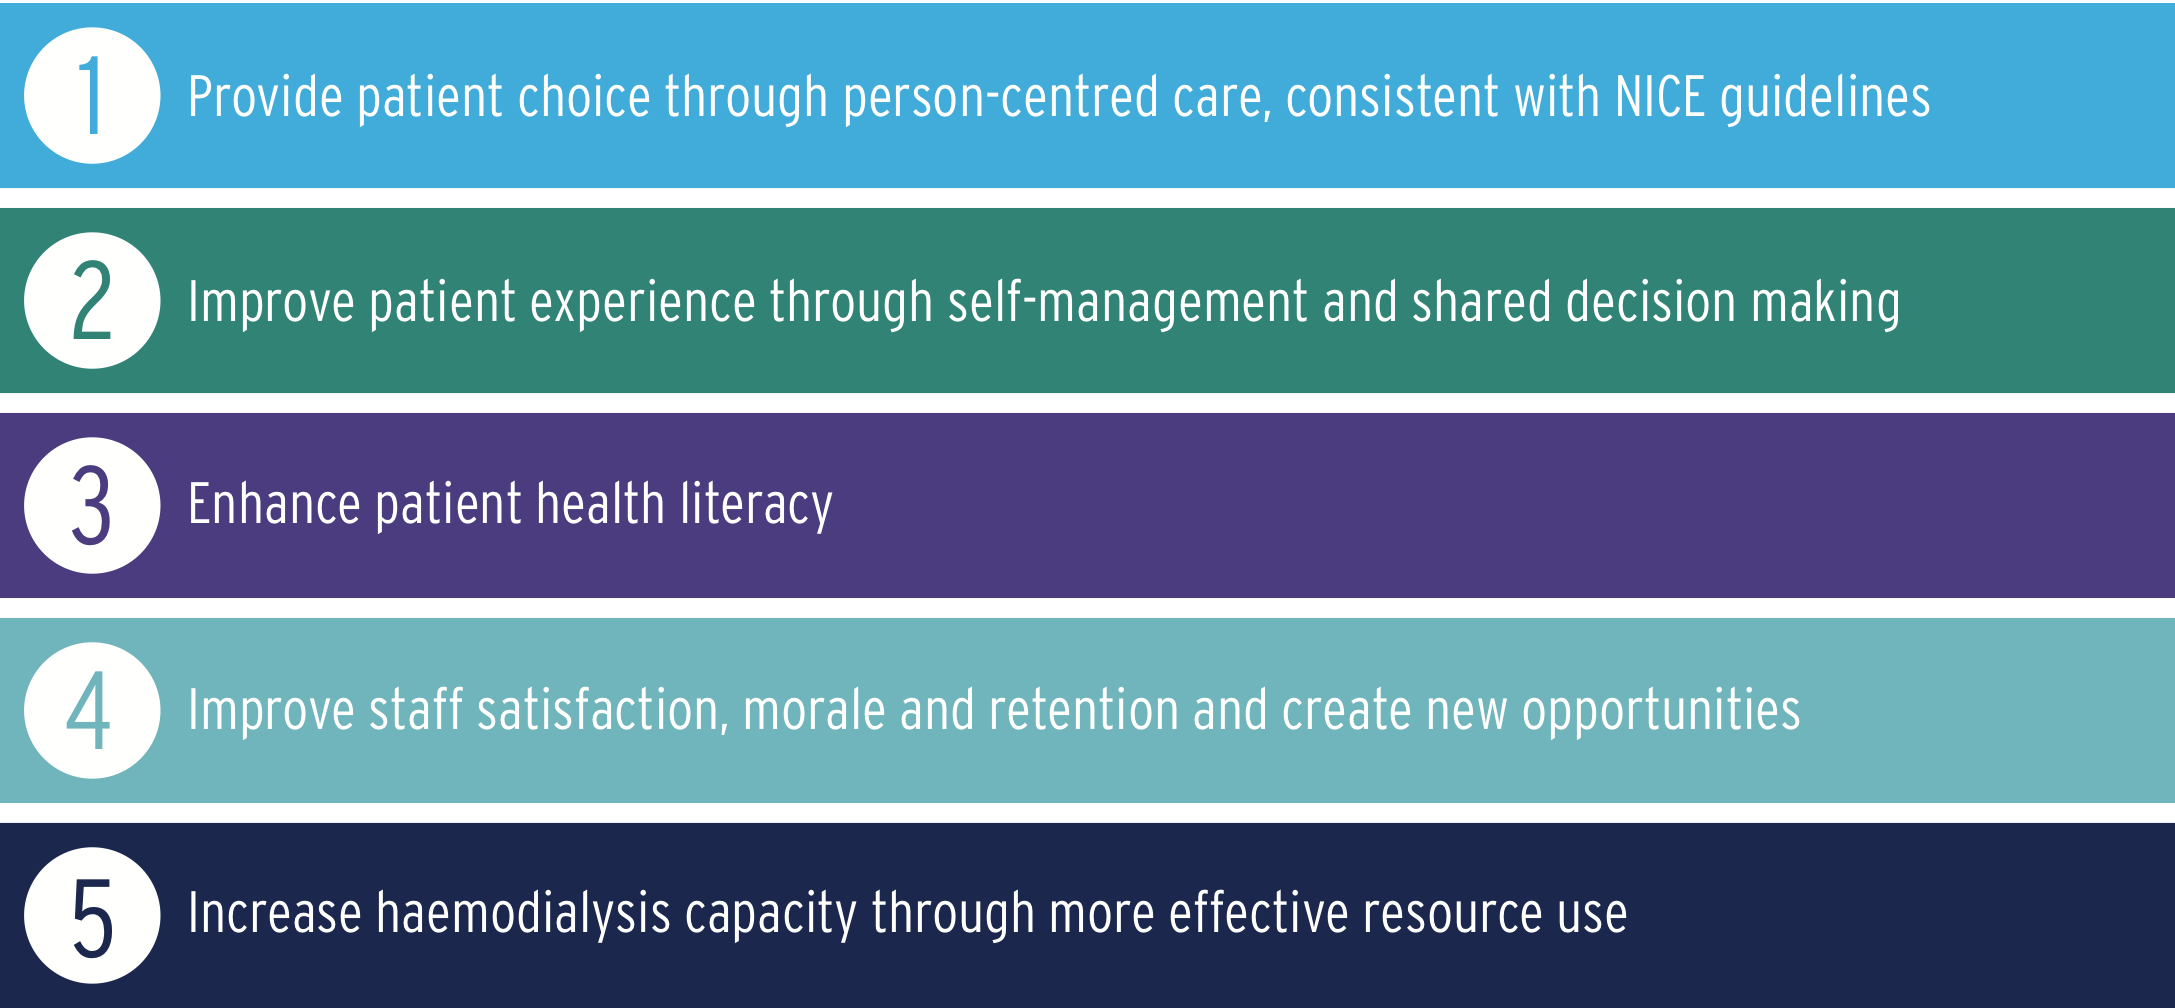 Benefits of the SHC model for healthcare organisations.